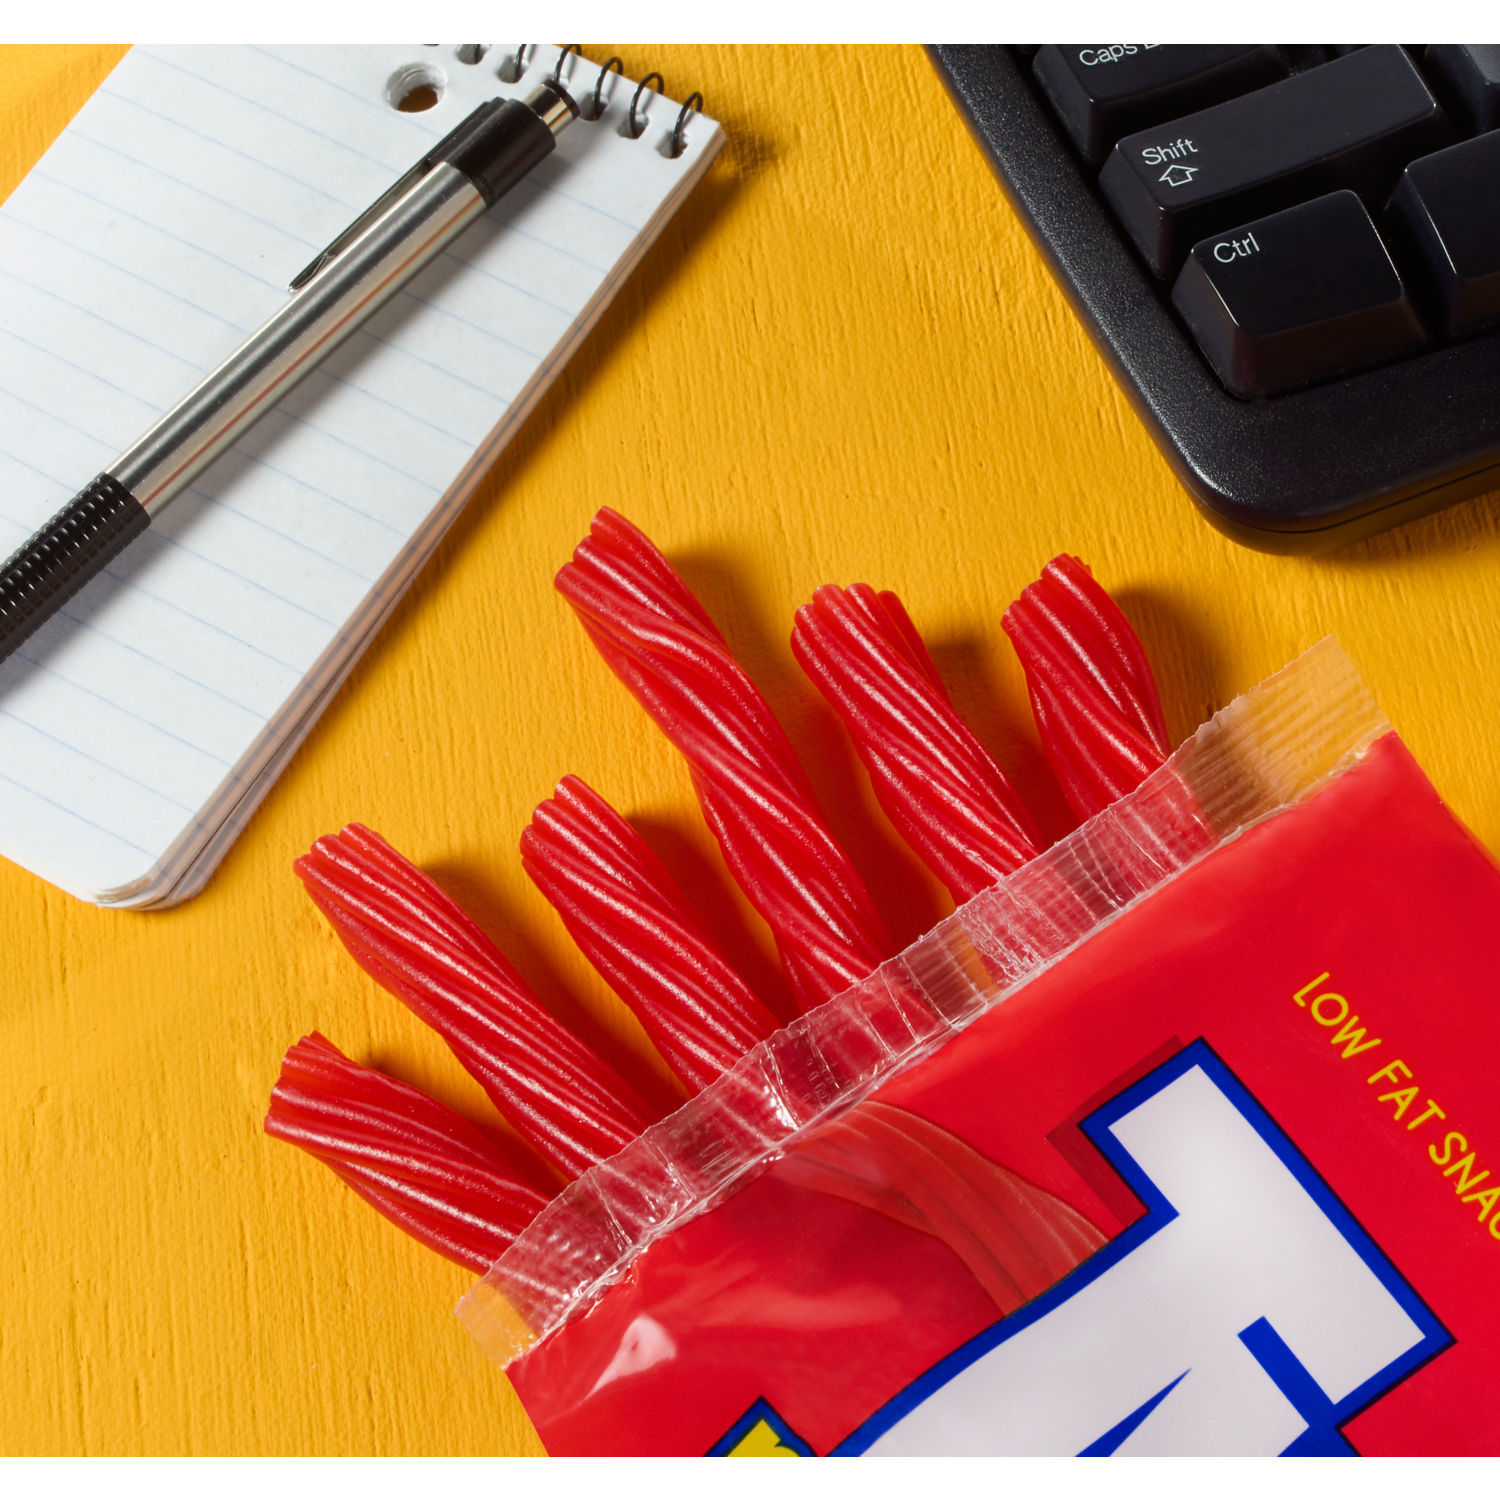 Twizzlers Pull 'N' Peel Cherry Flavored Licorice Style Low Fat Candy, Big Bag 28 oz - image 5 of 9